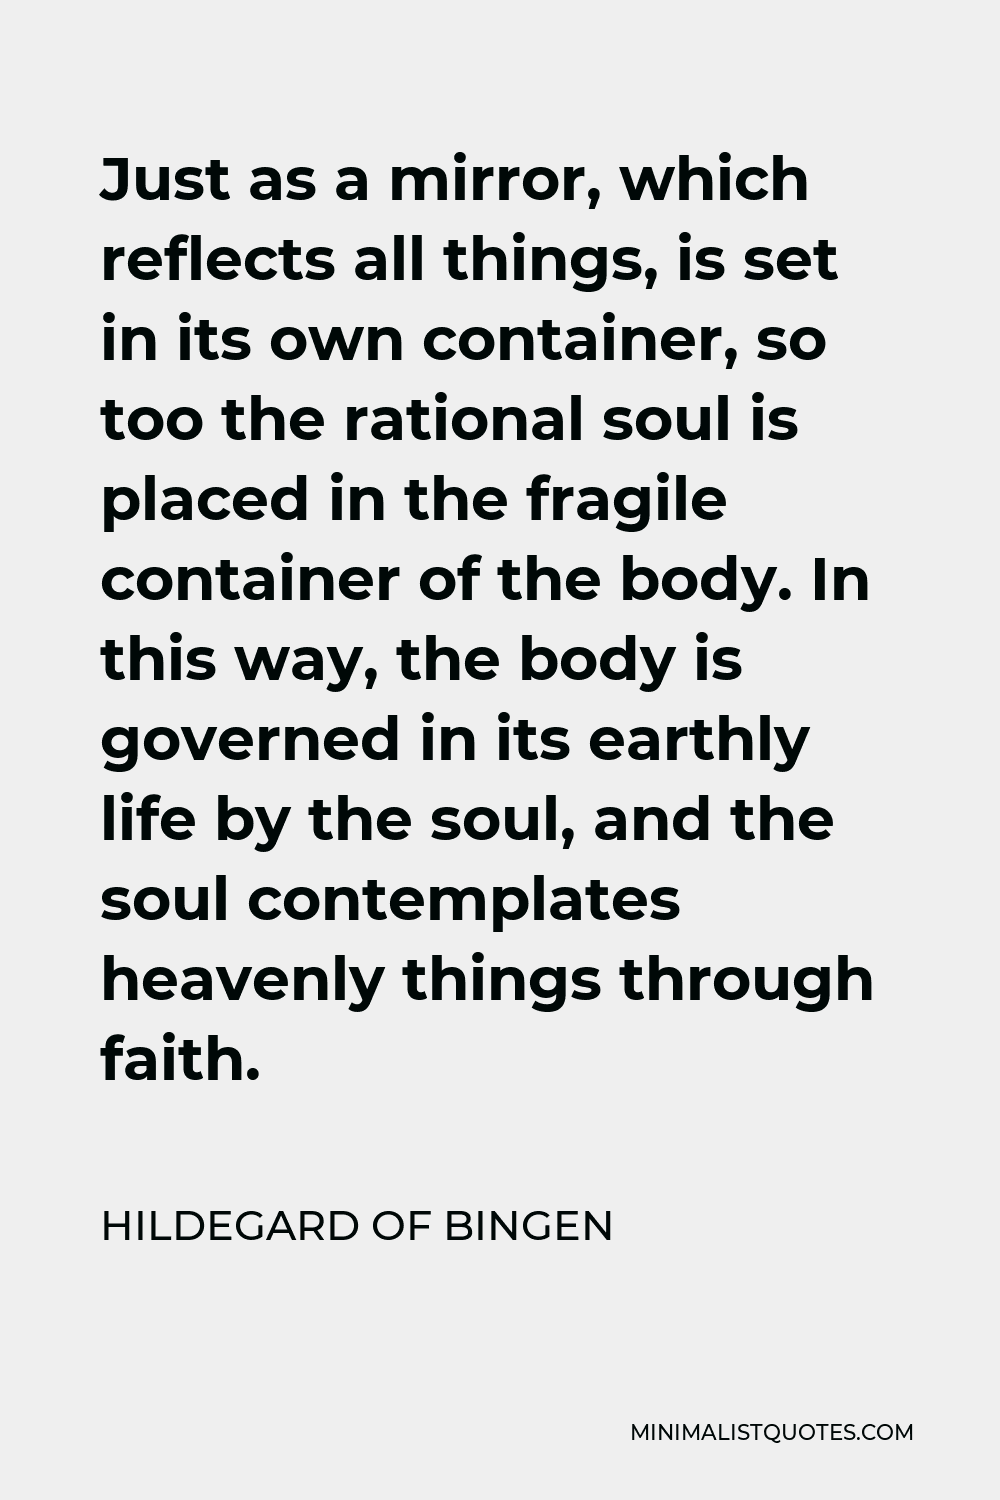 Hildegard of Bingen Quote - Just as a mirror, which reflects all things, is set in its own container, so too the rational soul is placed in the fragile container of the body. In this way, the body is governed in its earthly life by the soul, and the soul contemplates heavenly things through faith.